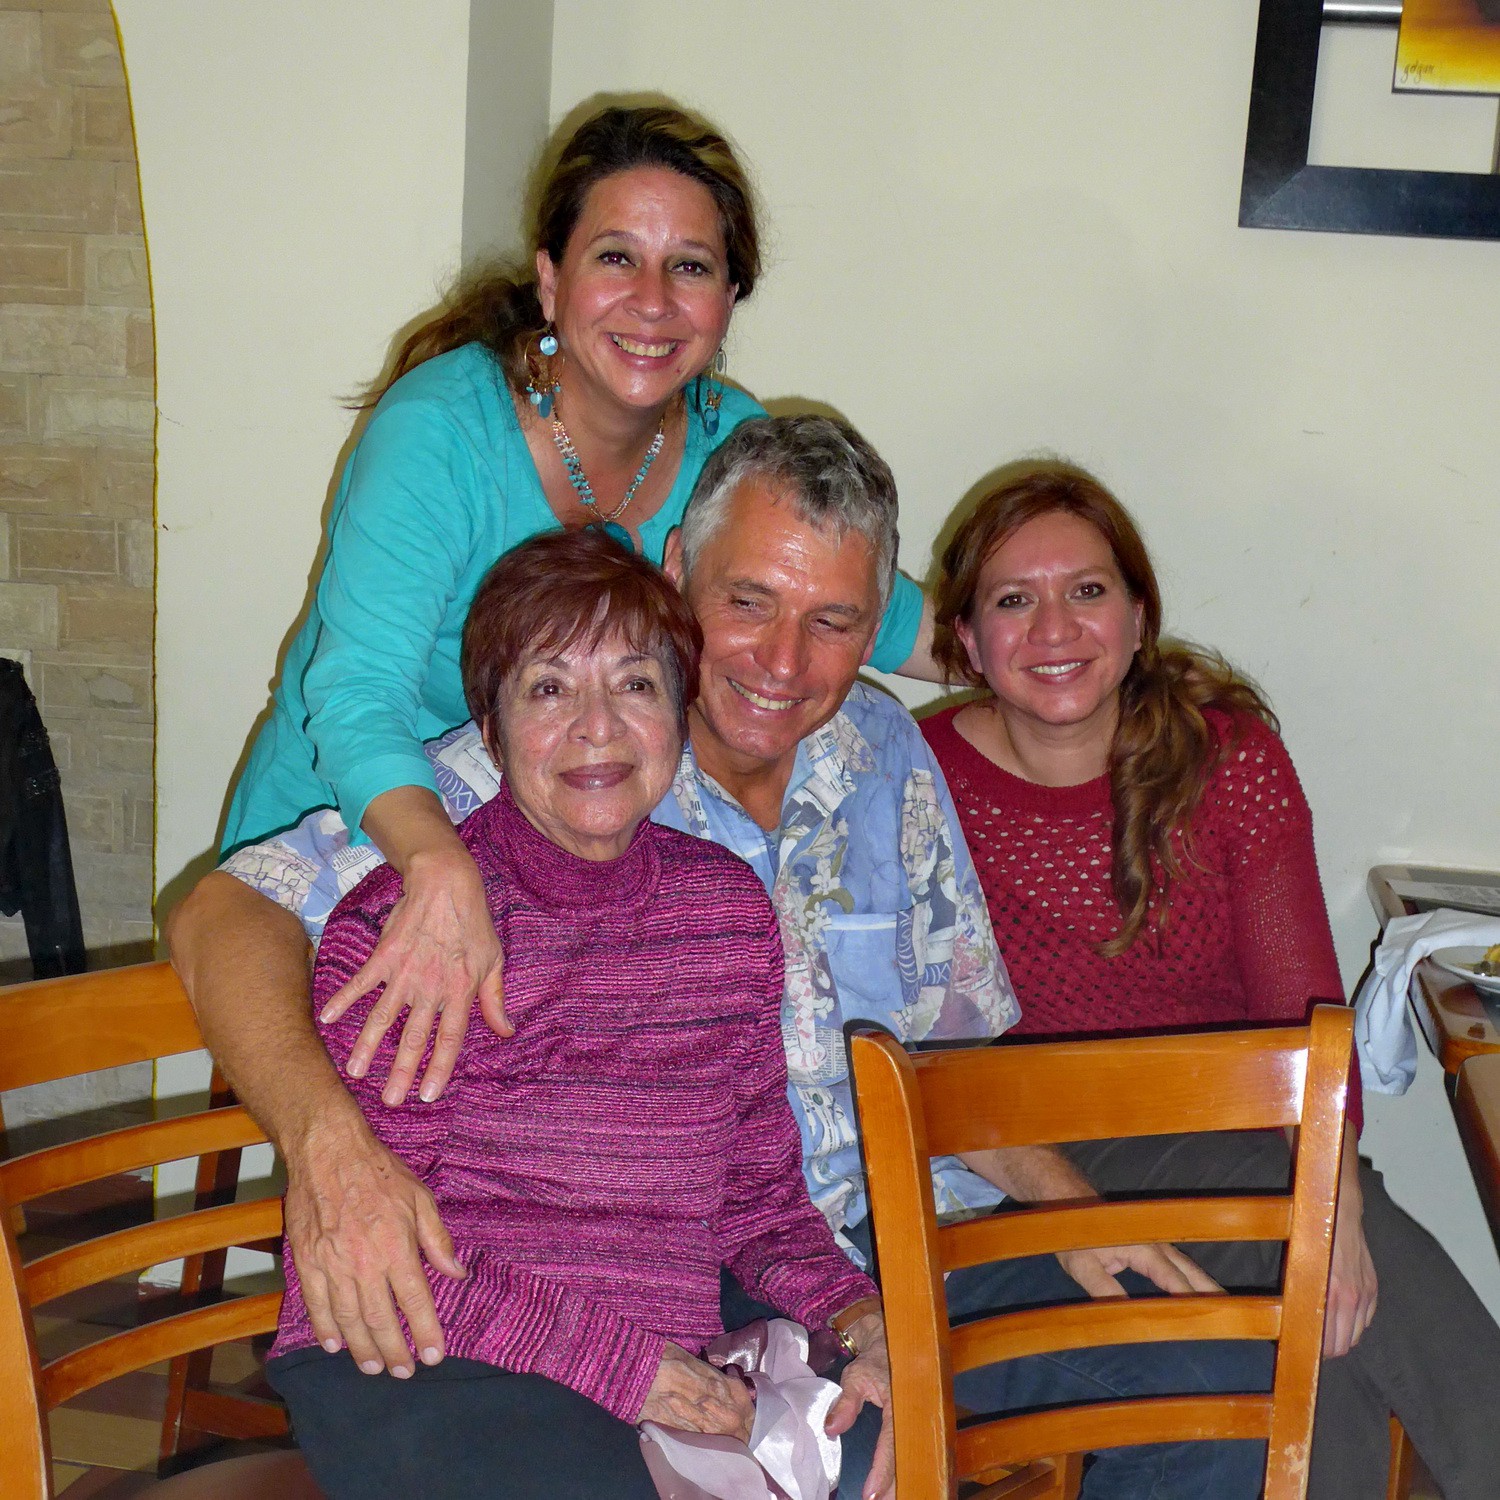 Our family in Mexico: Margarita with her other two kids - Aunts Bielushka and Jarushka, and Alfred